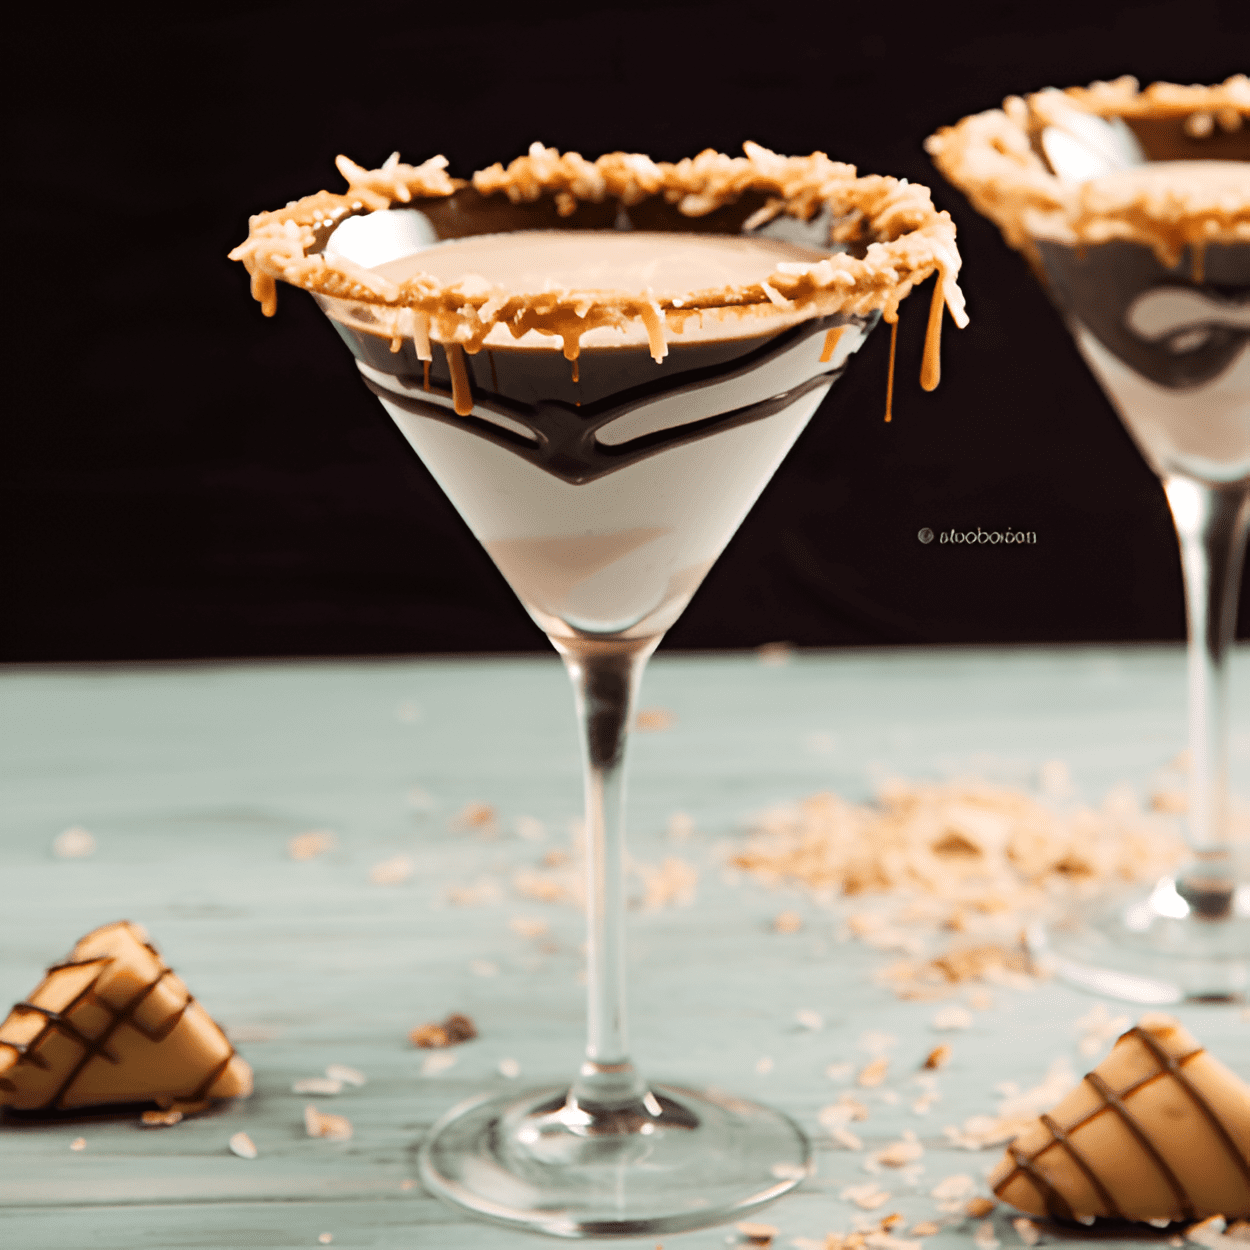 Samoa Cocktail Recipe - The Samoa cocktail is a rich, creamy, and indulgent drink. It has a sweet, chocolatey base with a hint of caramel and a touch of coconut. The finish is smooth and satisfying, reminiscent of the famous cookie it's named after.